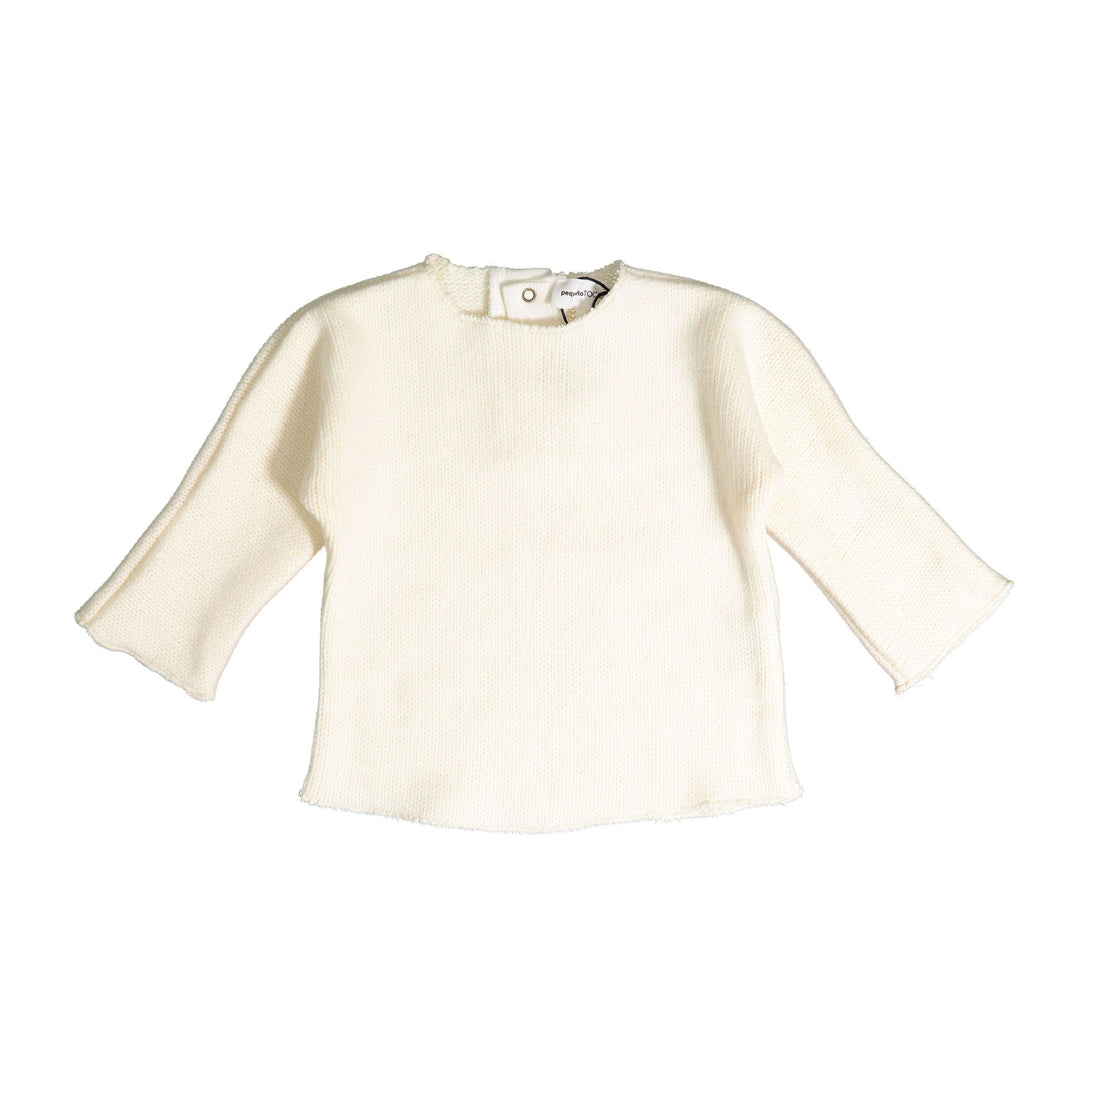 Pequeno Tocon Natural Baby Sweater